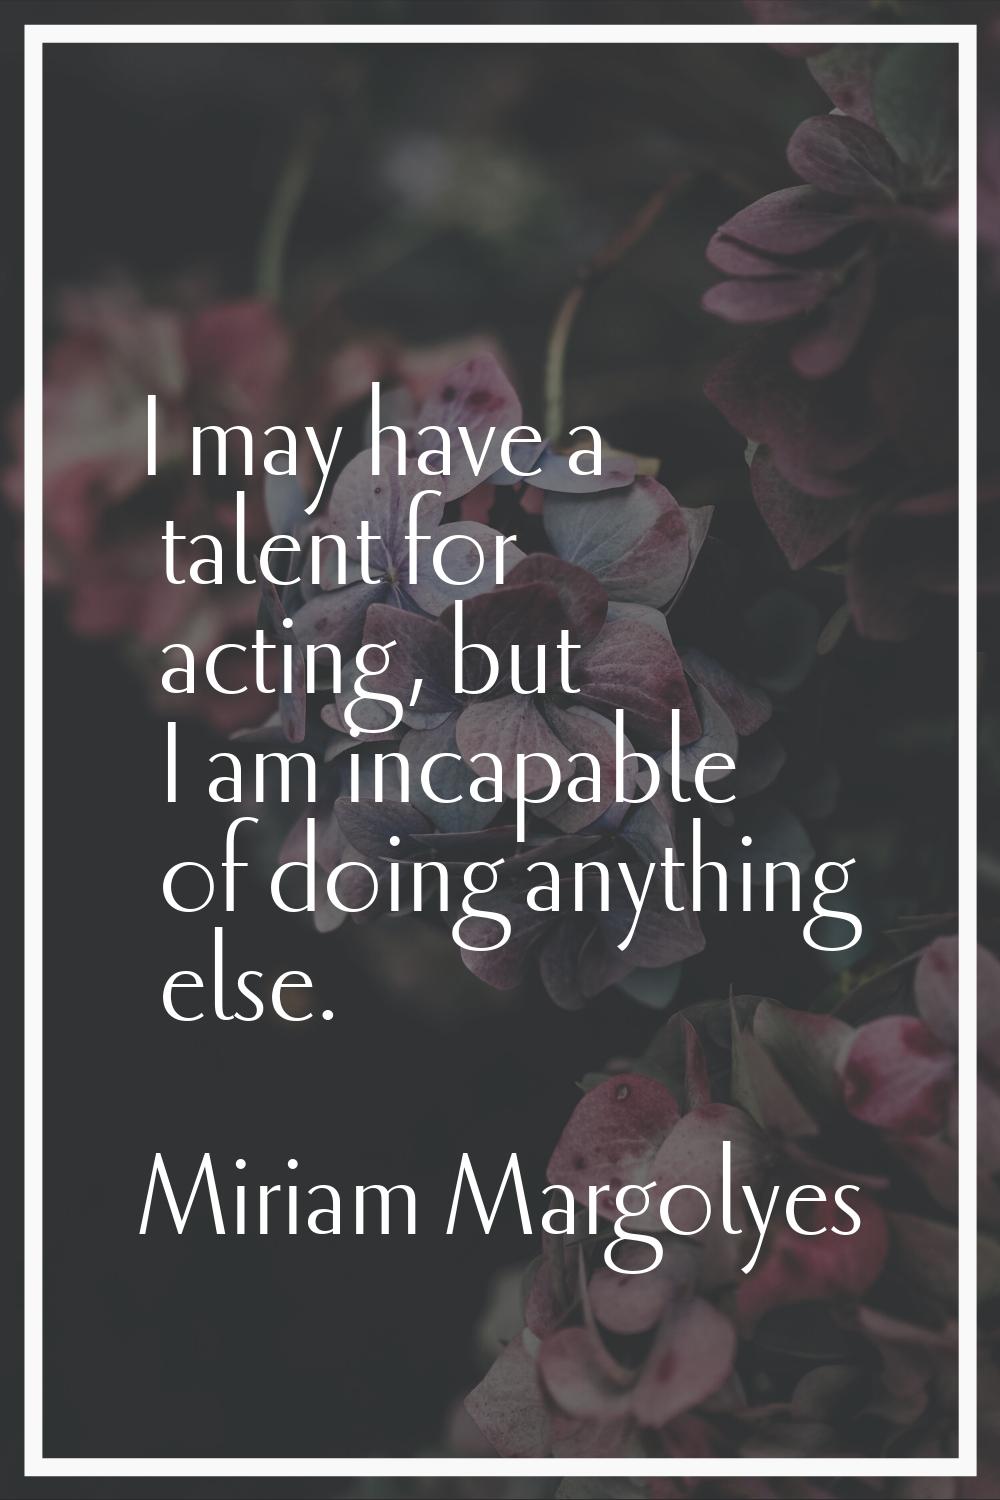 I may have a talent for acting, but I am incapable of doing anything else.